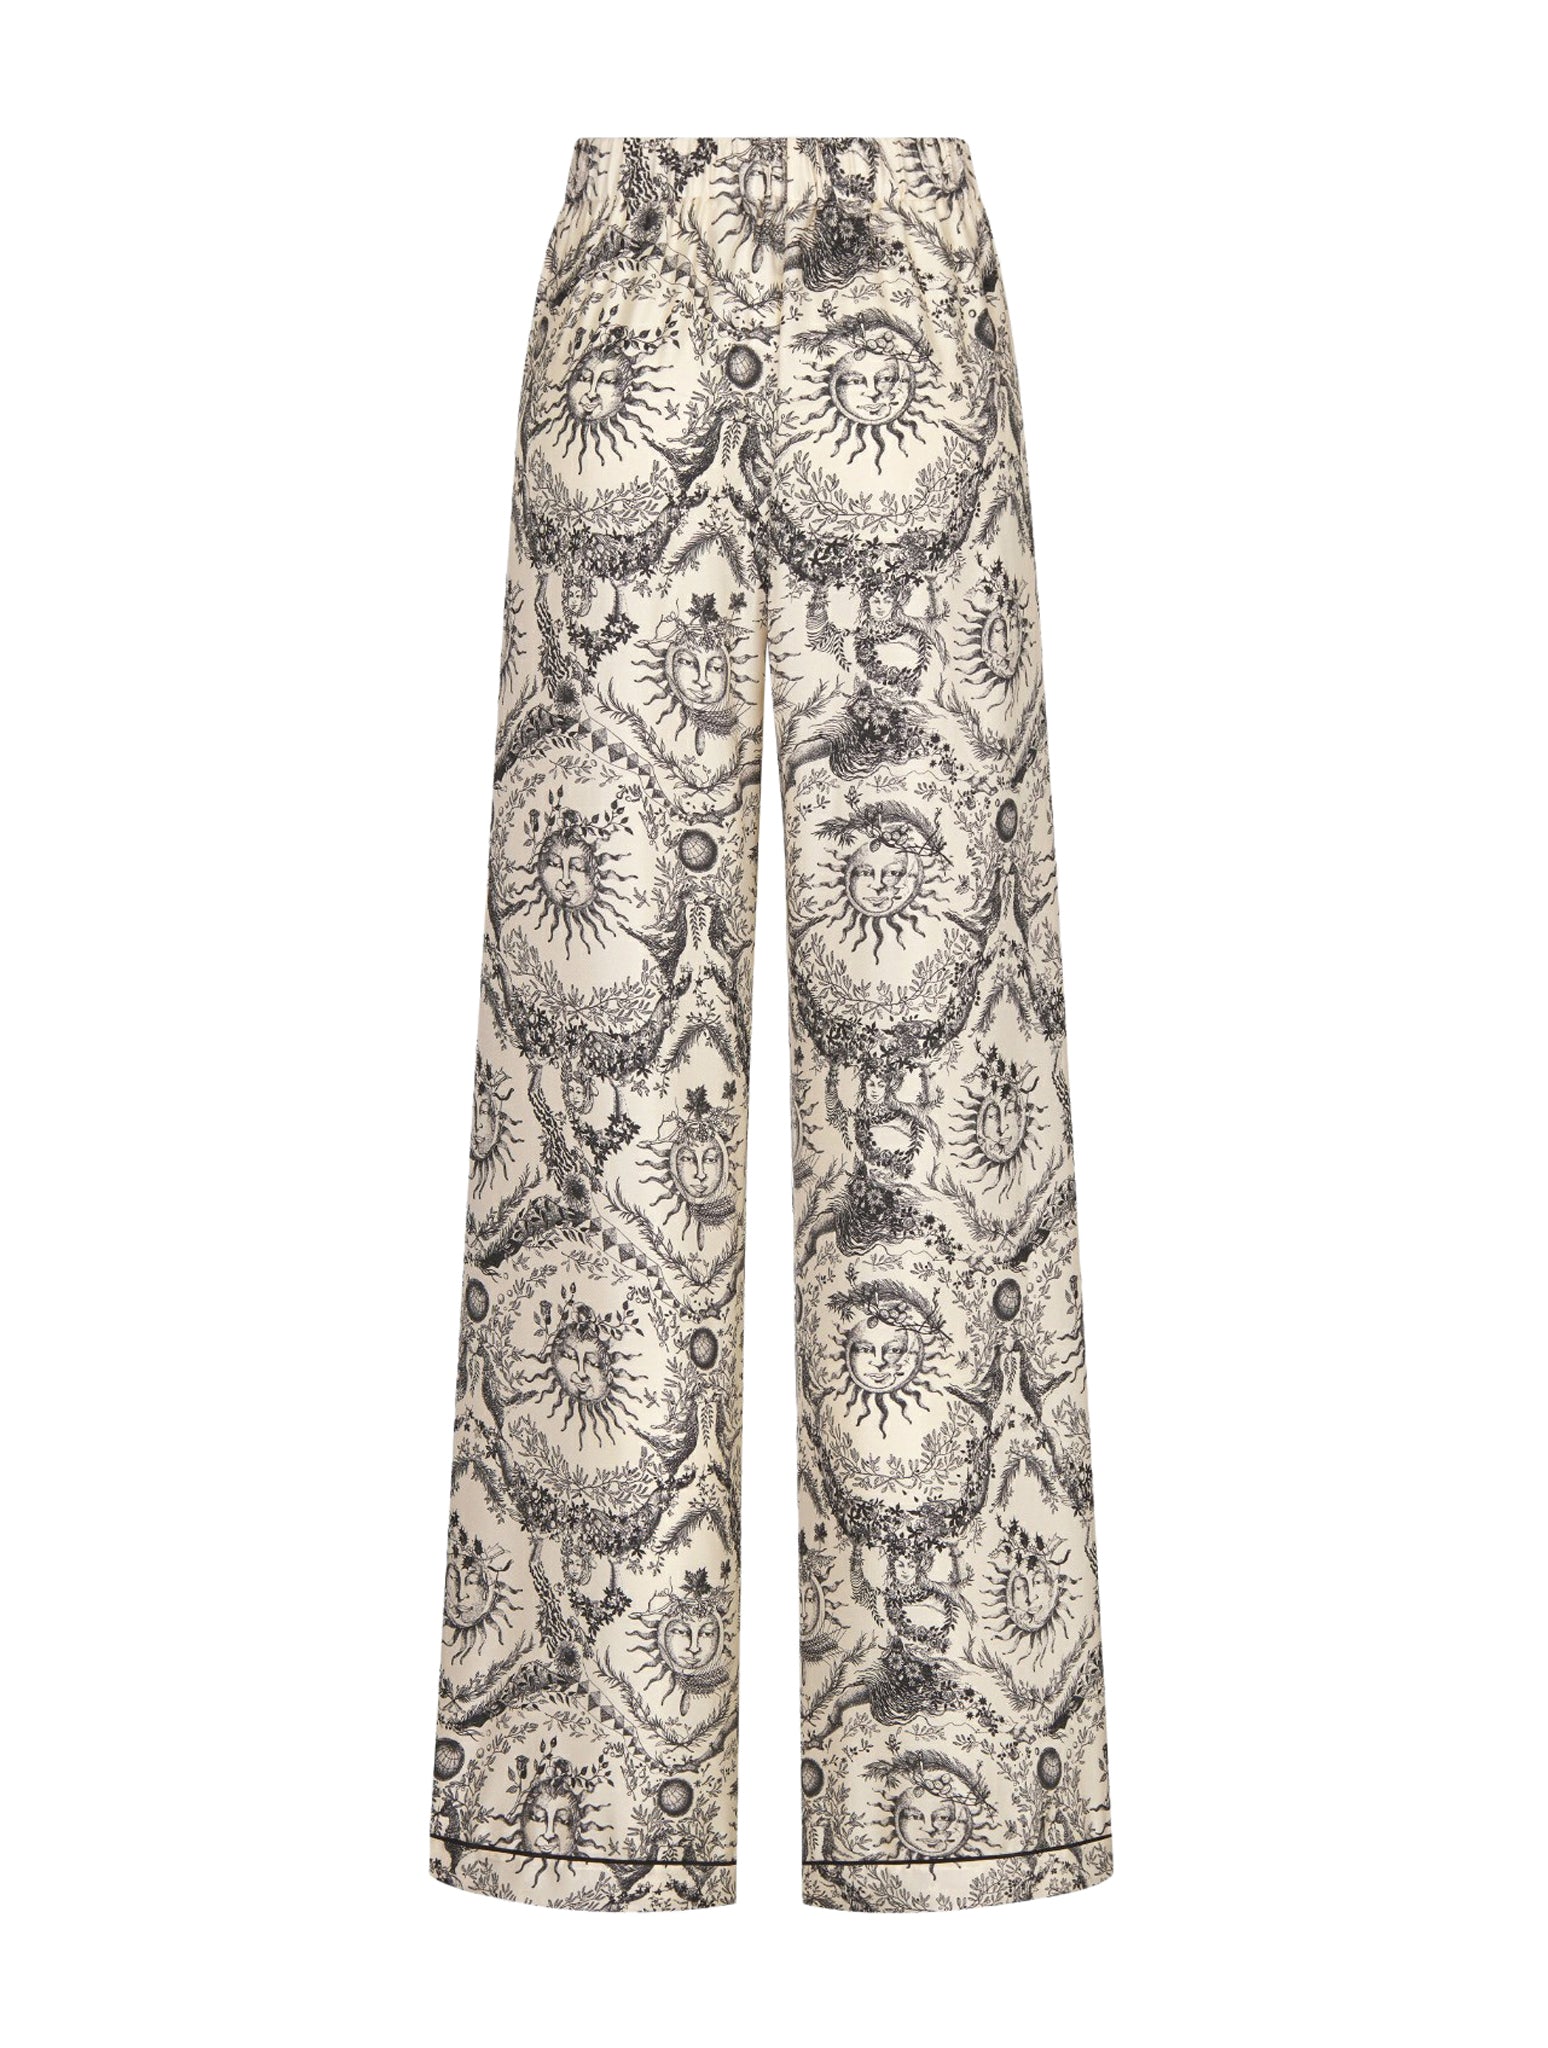 Trousers  White and gray Toile de Jouy Soleil silk twill